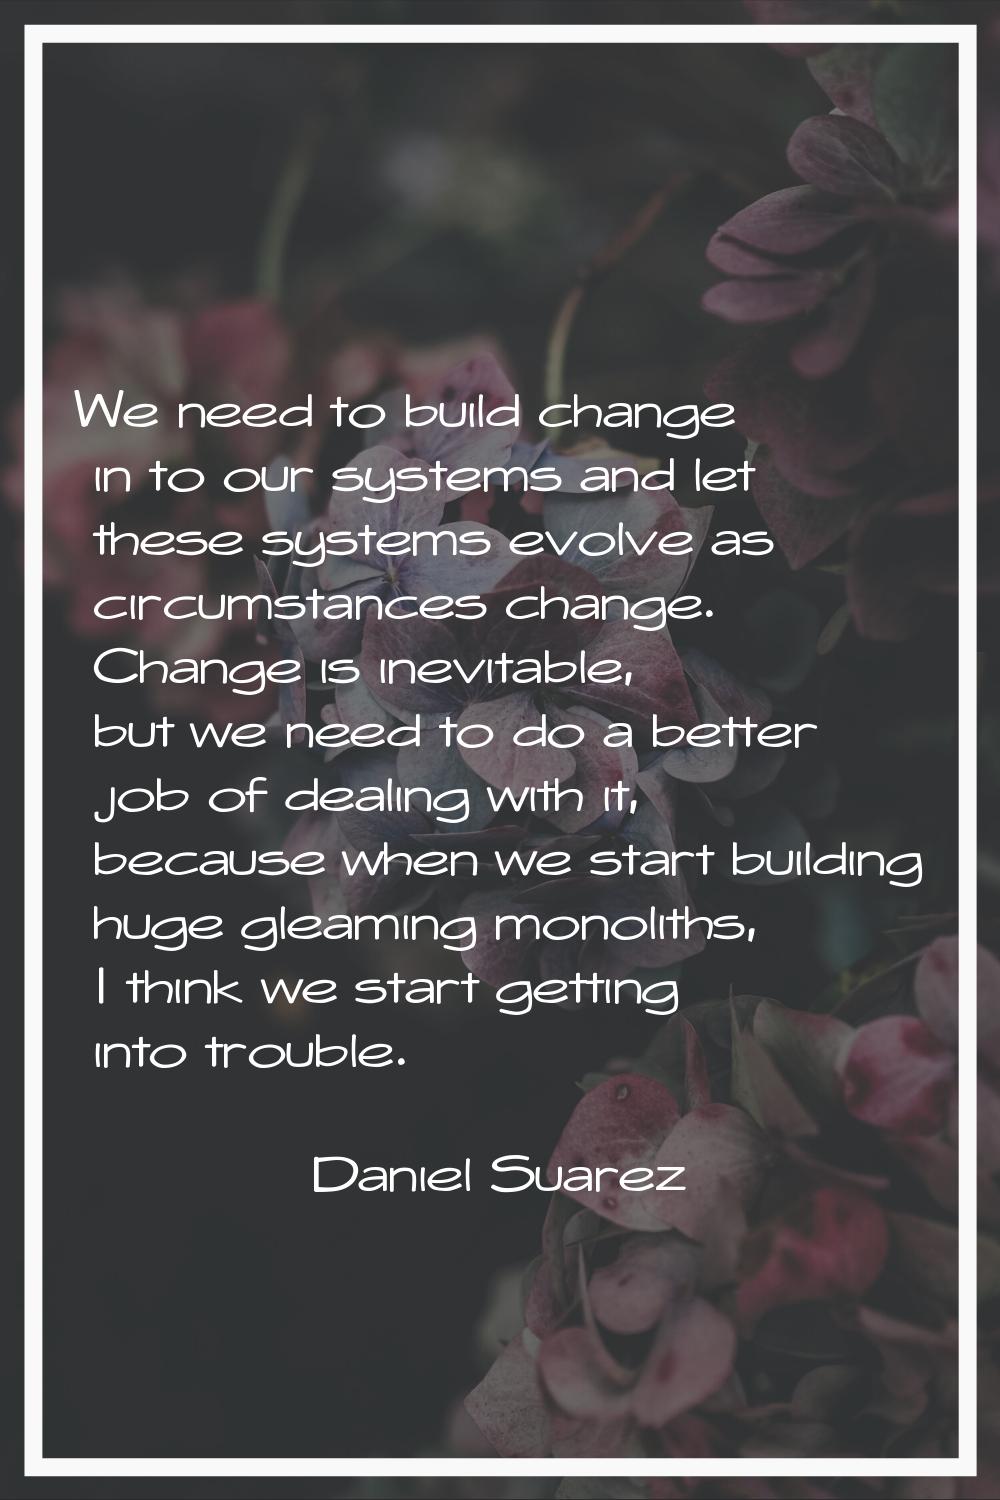 We need to build change in to our systems and let these systems evolve as circumstances change. Cha